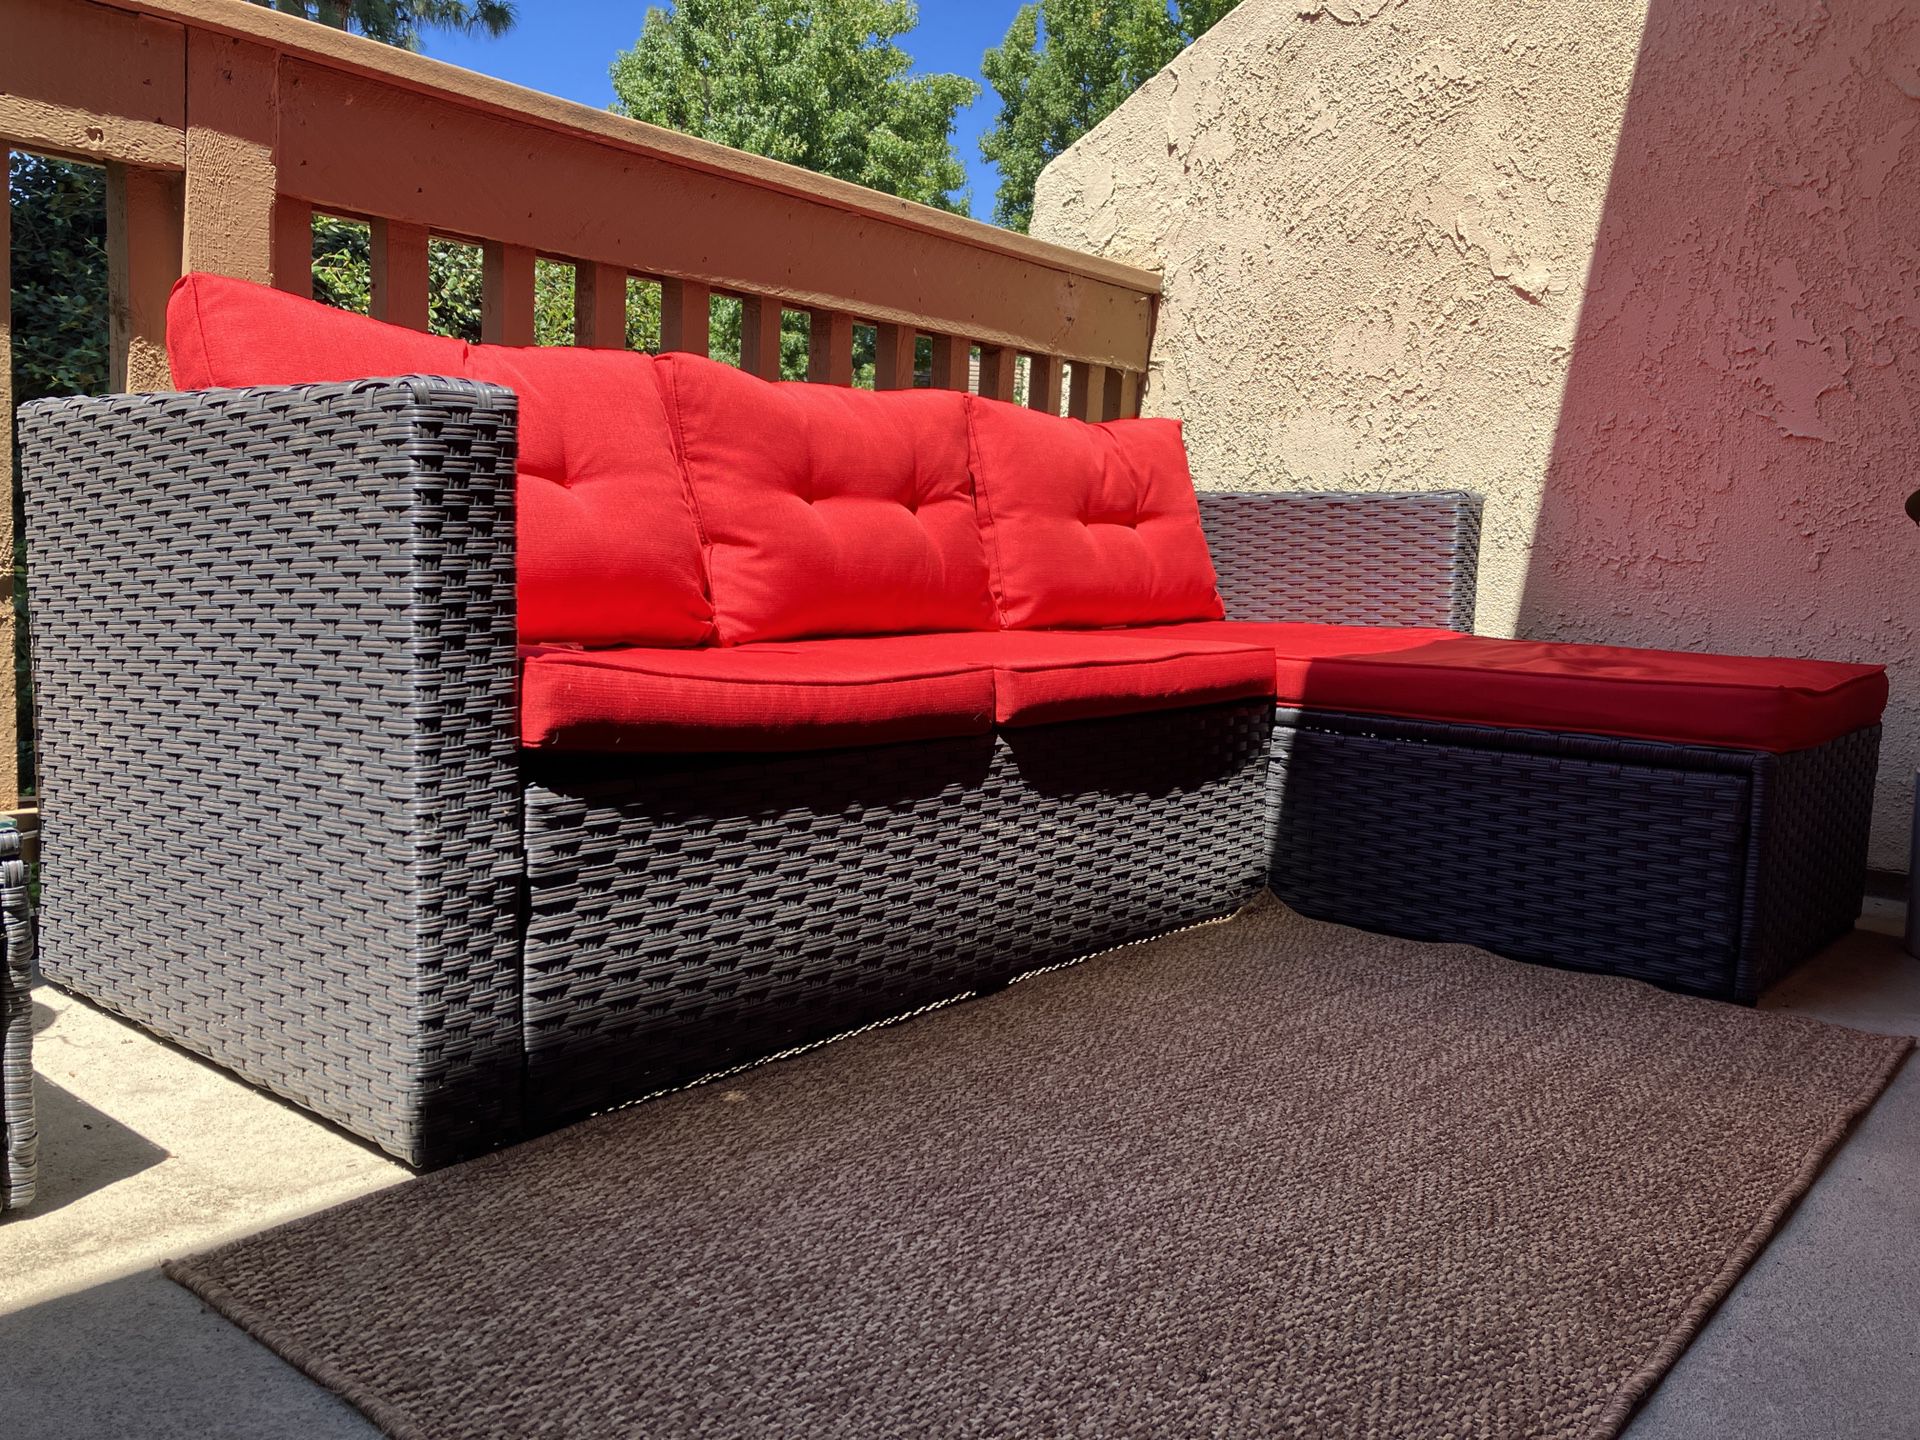 Outdoor Sofa & Table For Sale